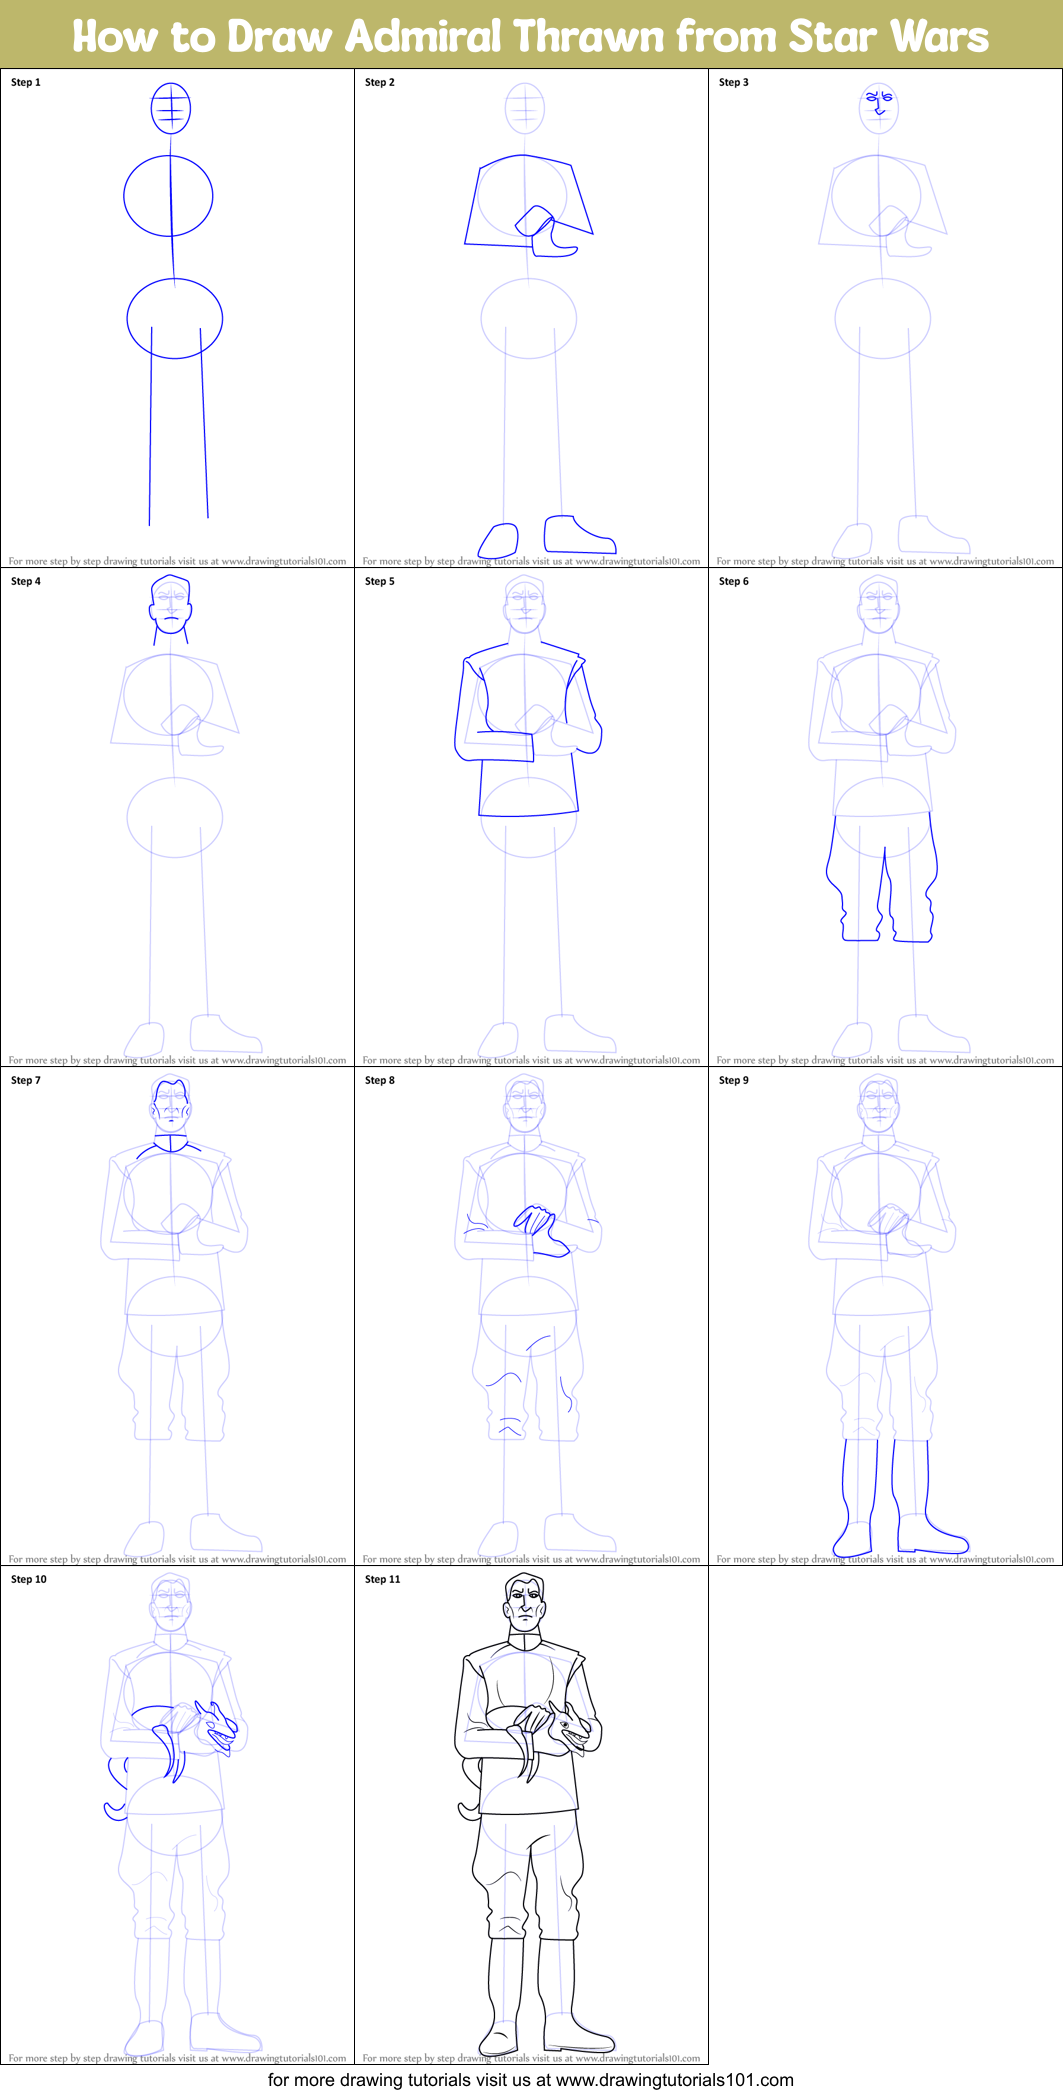 How To Draw Admiral Thrawn From Star Wars Printable Step By Step Drawing Sheet Drawingtutorials101 Com - roblox grand admiral thrawn